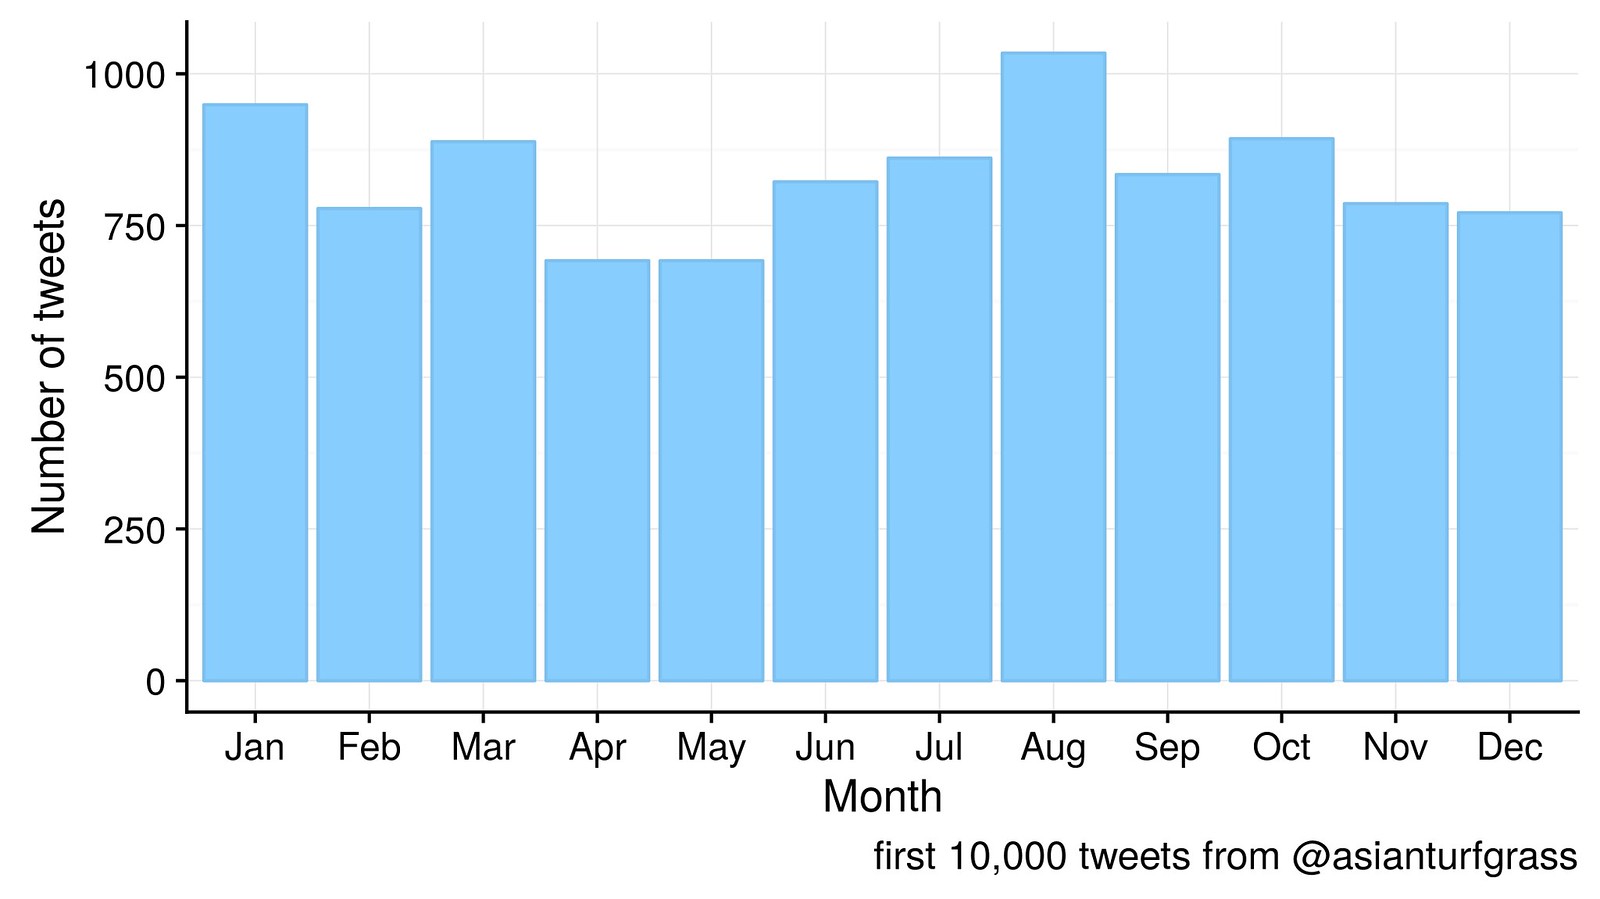 tweets by month